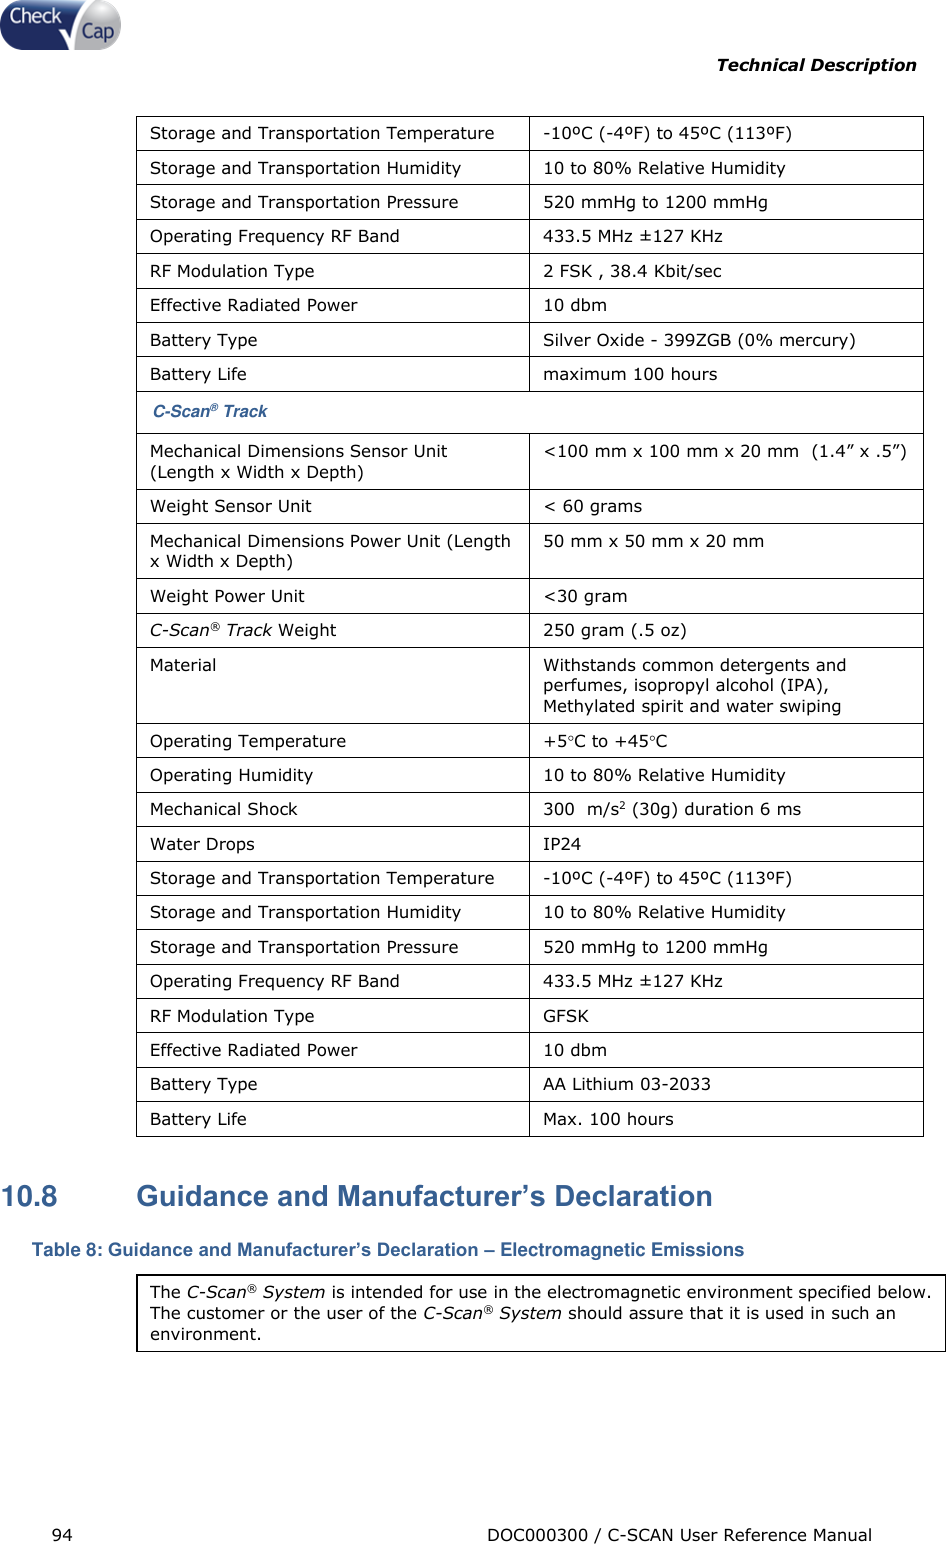 Page 94 of Check Cap TRACK10007605 C-Scan track transceiver User Manual Title